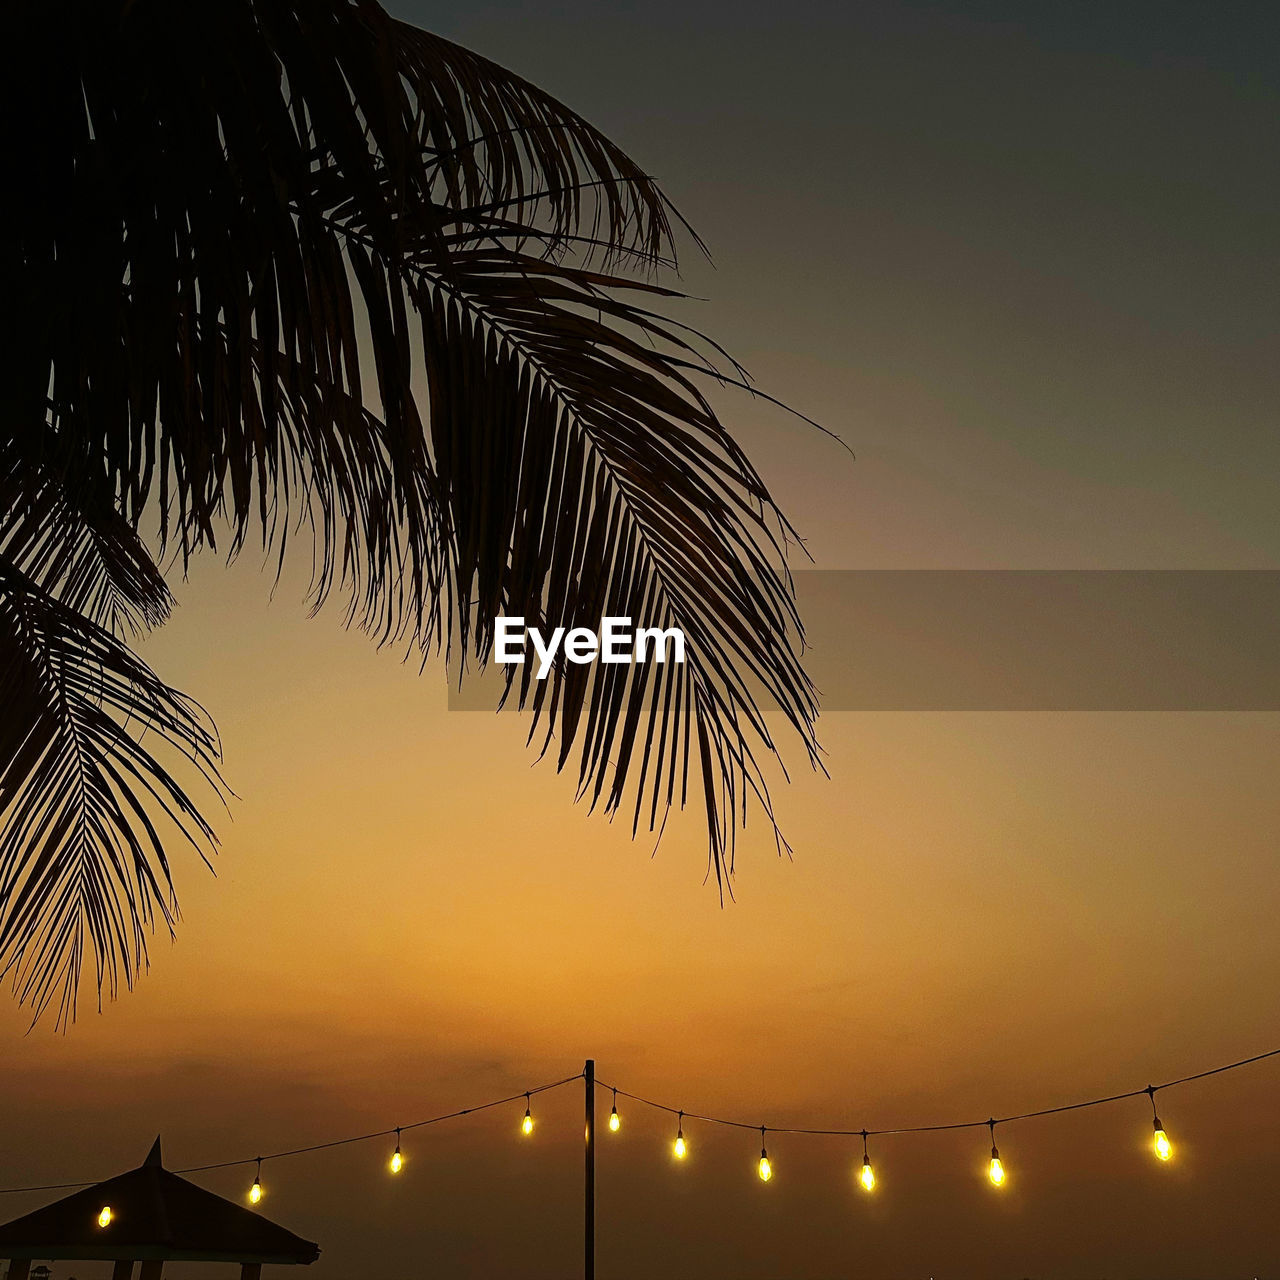 sky, palm tree, sunset, tropical climate, nature, tree, silhouette, illuminated, beauty in nature, night, dusk, evening, no people, architecture, plant, tranquility, outdoors, scenics - nature, palm leaf, light, travel destinations, built structure, tranquil scene, city, idyllic, low angle view, water